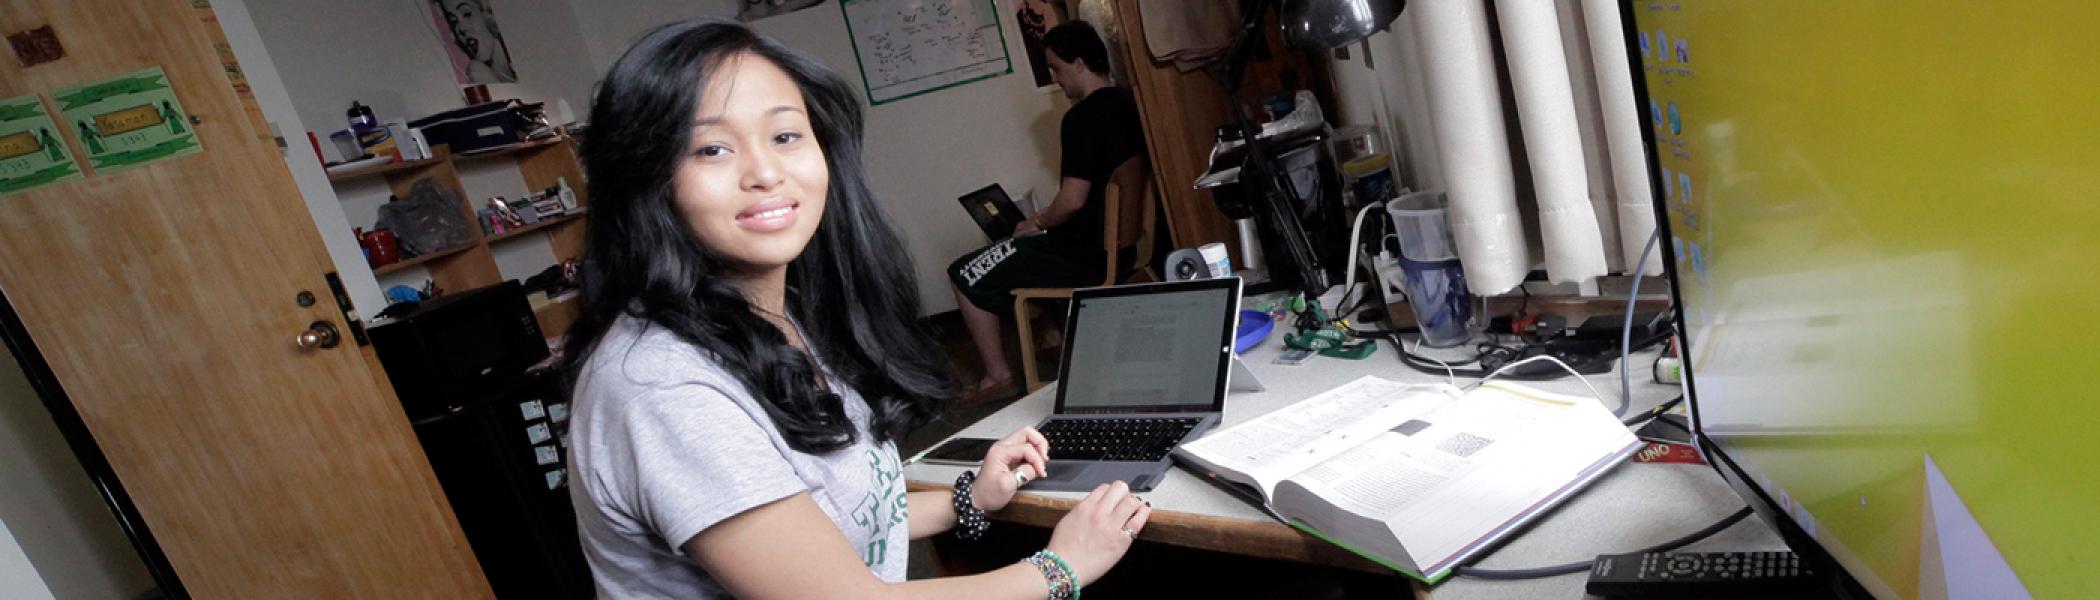 Student working on laptops in Lady Eaton College dorm room